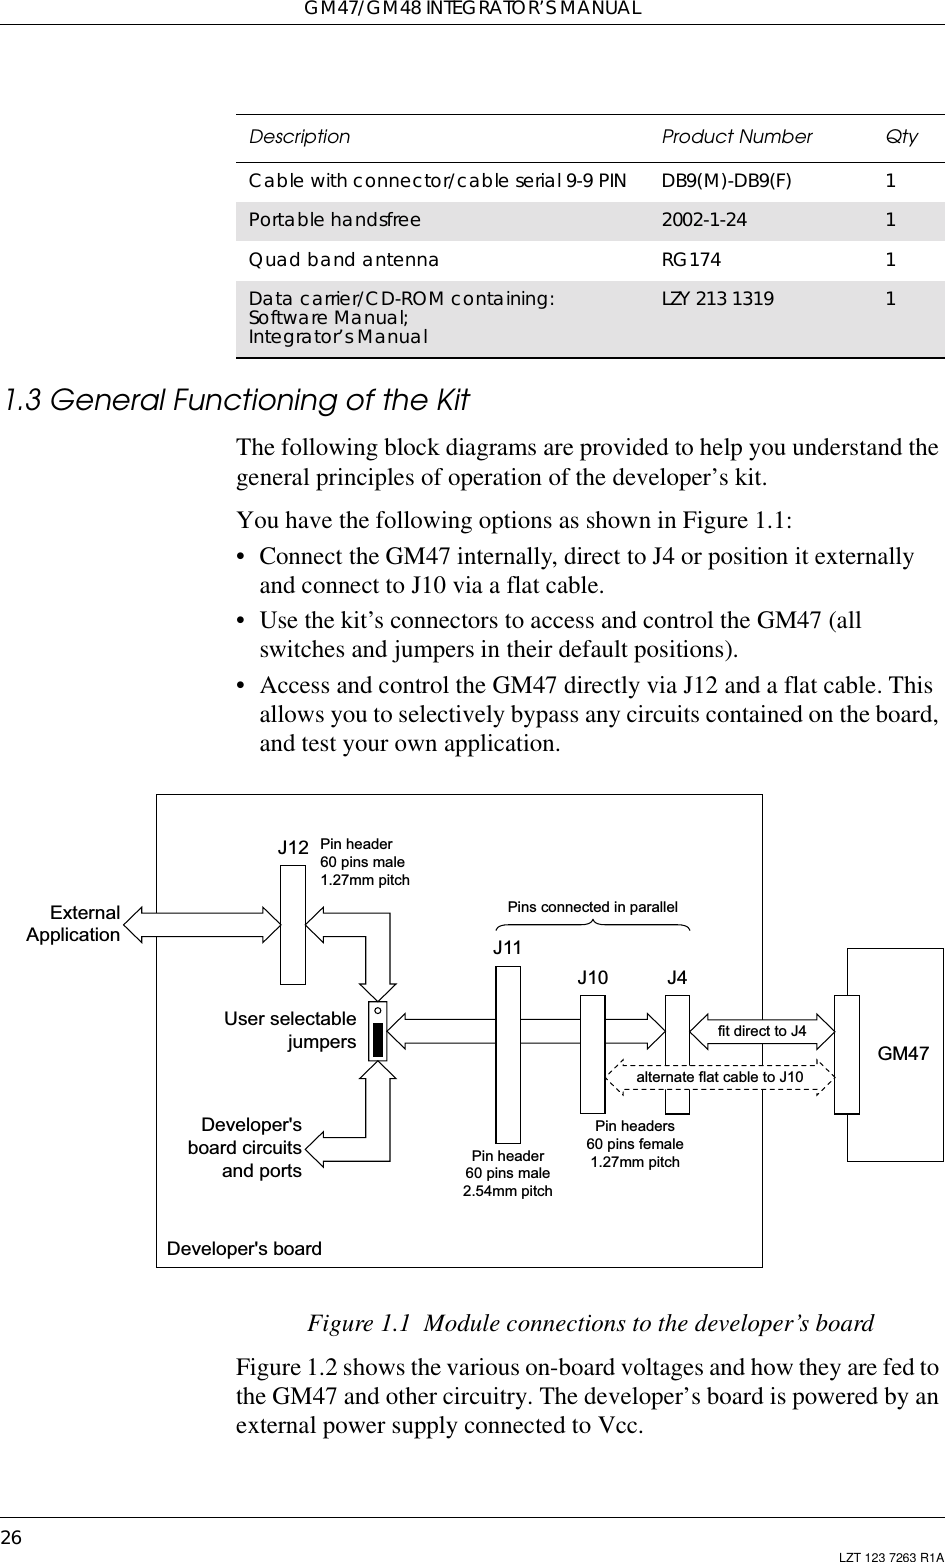 GM47/GM48 INTEGRATOR’S MANUAL26 LZT 123 7263 R1A1.3 General Functioning of the KitThe following block diagrams are provided to help you understand thegeneral principles of operation of the developer’s kit.You have the following options as shown in Figure 1.1:• Connect the GM47 internally, direct to J4 or position it externallyand connect to J10 via a flat cable.• Use the kit’s connectors to access and control the GM47 (allswitches and jumpers in their default positions).• Access and control the GM47 directly via J12 and a flat cable. Thisallows you to selectively bypass any circuits contained on the board,and test your own application.Figure 1.1 Module connections to the developer’s boardFigure 1.2 shows the various on-board voltages and how they are fed tothe GM47 and other circuitry. The developer’s board is powered by anexternal power supply connected to Vcc.Cable with connector/cable serial 9-9 PIN DB9(M)-DB9(F) 1Portable handsfree 2002-1-24 1Quad band antenna RG174 1Data carrier/CD-ROM containing:Software Manual;Integrator’s ManualLZY 213 1319 1Description Product Number QtyExternalApplicationJ4J10J11J12Developer&apos;sboard circuitsand portsUser selectablejumpersPin headers60 pins female1.27mm pitchPin header60 pins male2.54mm pitchPin header60 pins male1.27mm pitchGM47Developer&apos;s boardfit direct to J4alternate flat cable to J10Pins connected in parallel